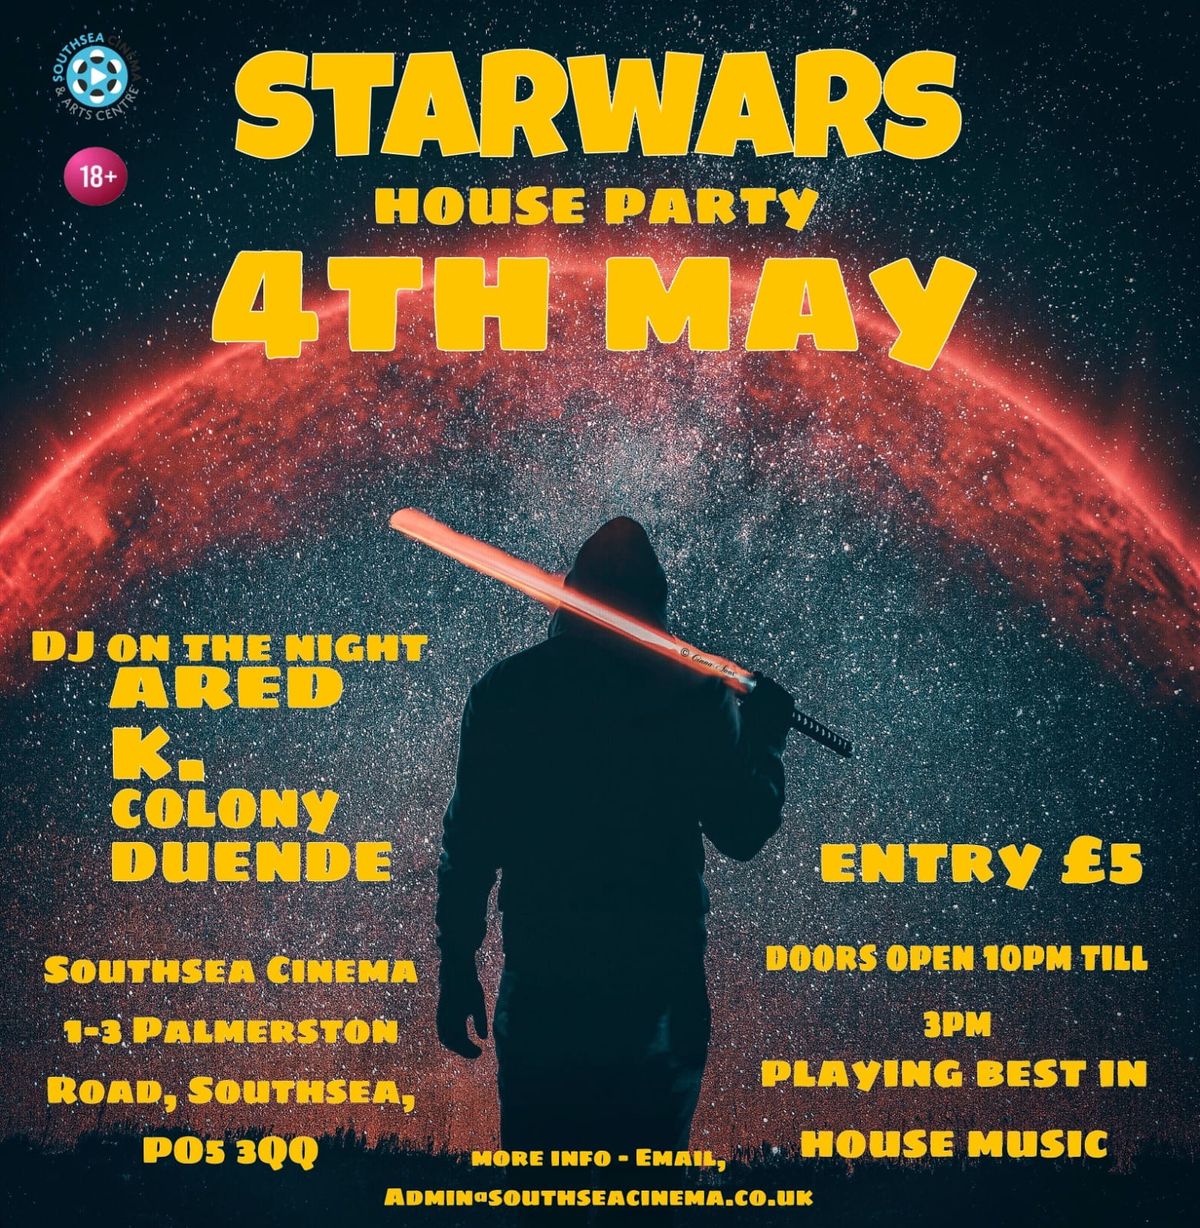 StartWars House Party 4th of May